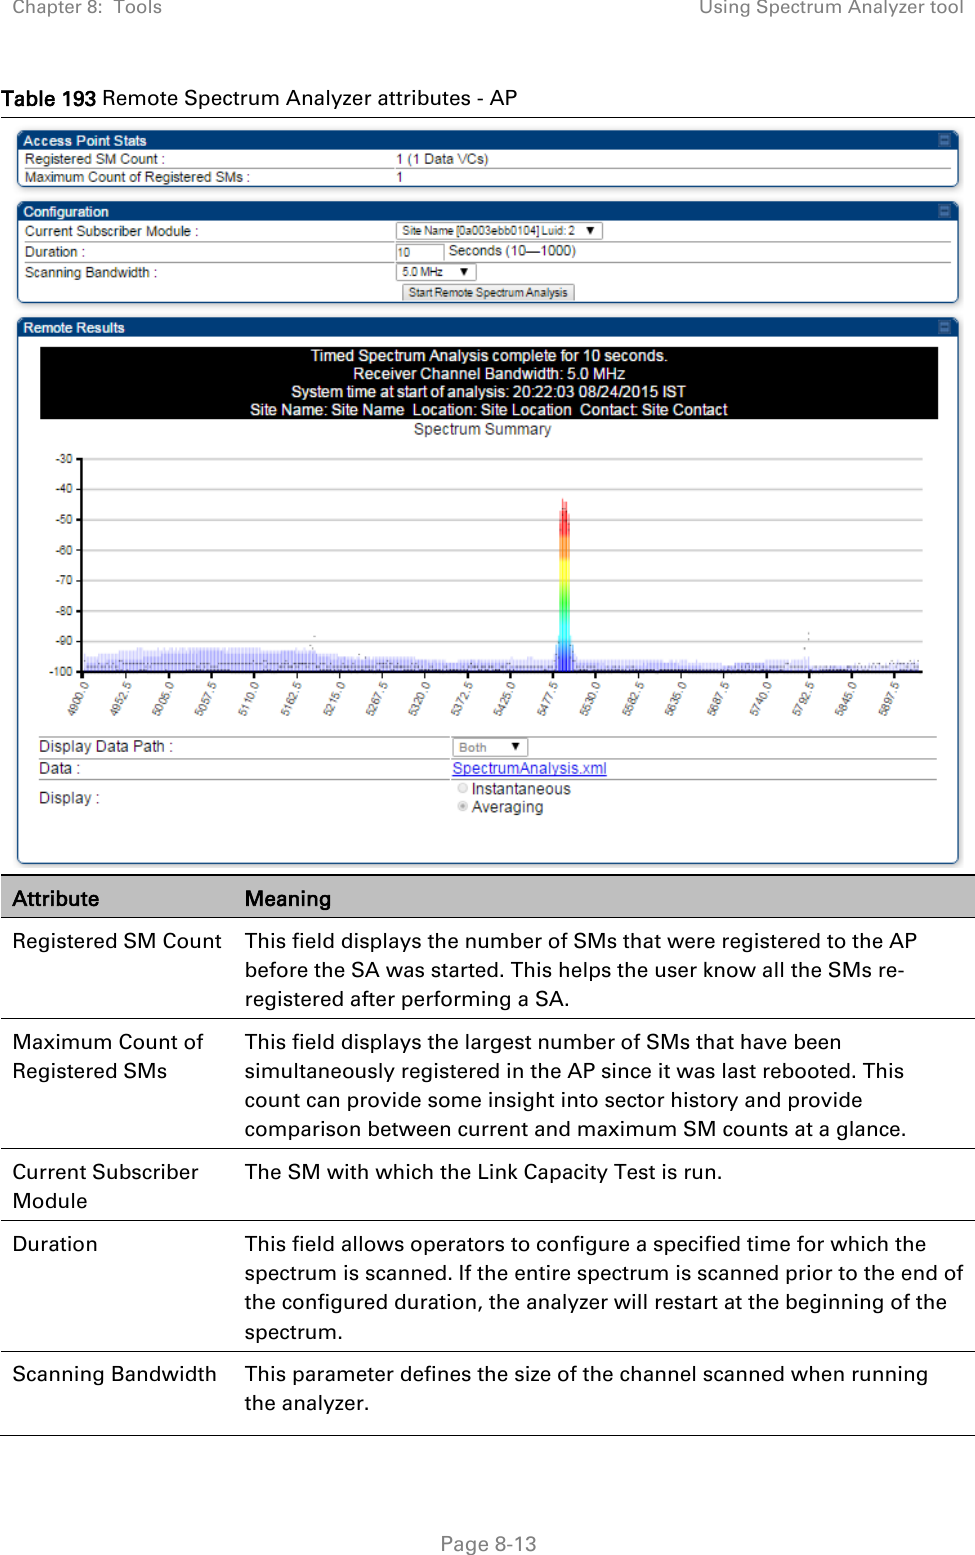 Chapter 8:  Tools Using Spectrum Analyzer tool   Page 8-13 Table 193 Remote Spectrum Analyzer attributes - AP  Attribute Meaning Registered SM Count This field displays the number of SMs that were registered to the AP before the SA was started. This helps the user know all the SMs re-registered after performing a SA. Maximum Count of Registered SMs This field displays the largest number of SMs that have been simultaneously registered in the AP since it was last rebooted. This count can provide some insight into sector history and provide comparison between current and maximum SM counts at a glance. Current Subscriber Module The SM with which the Link Capacity Test is run. Duration  This field allows operators to configure a specified time for which the spectrum is scanned. If the entire spectrum is scanned prior to the end of the configured duration, the analyzer will restart at the beginning of the spectrum. Scanning Bandwidth This parameter defines the size of the channel scanned when running the analyzer. 